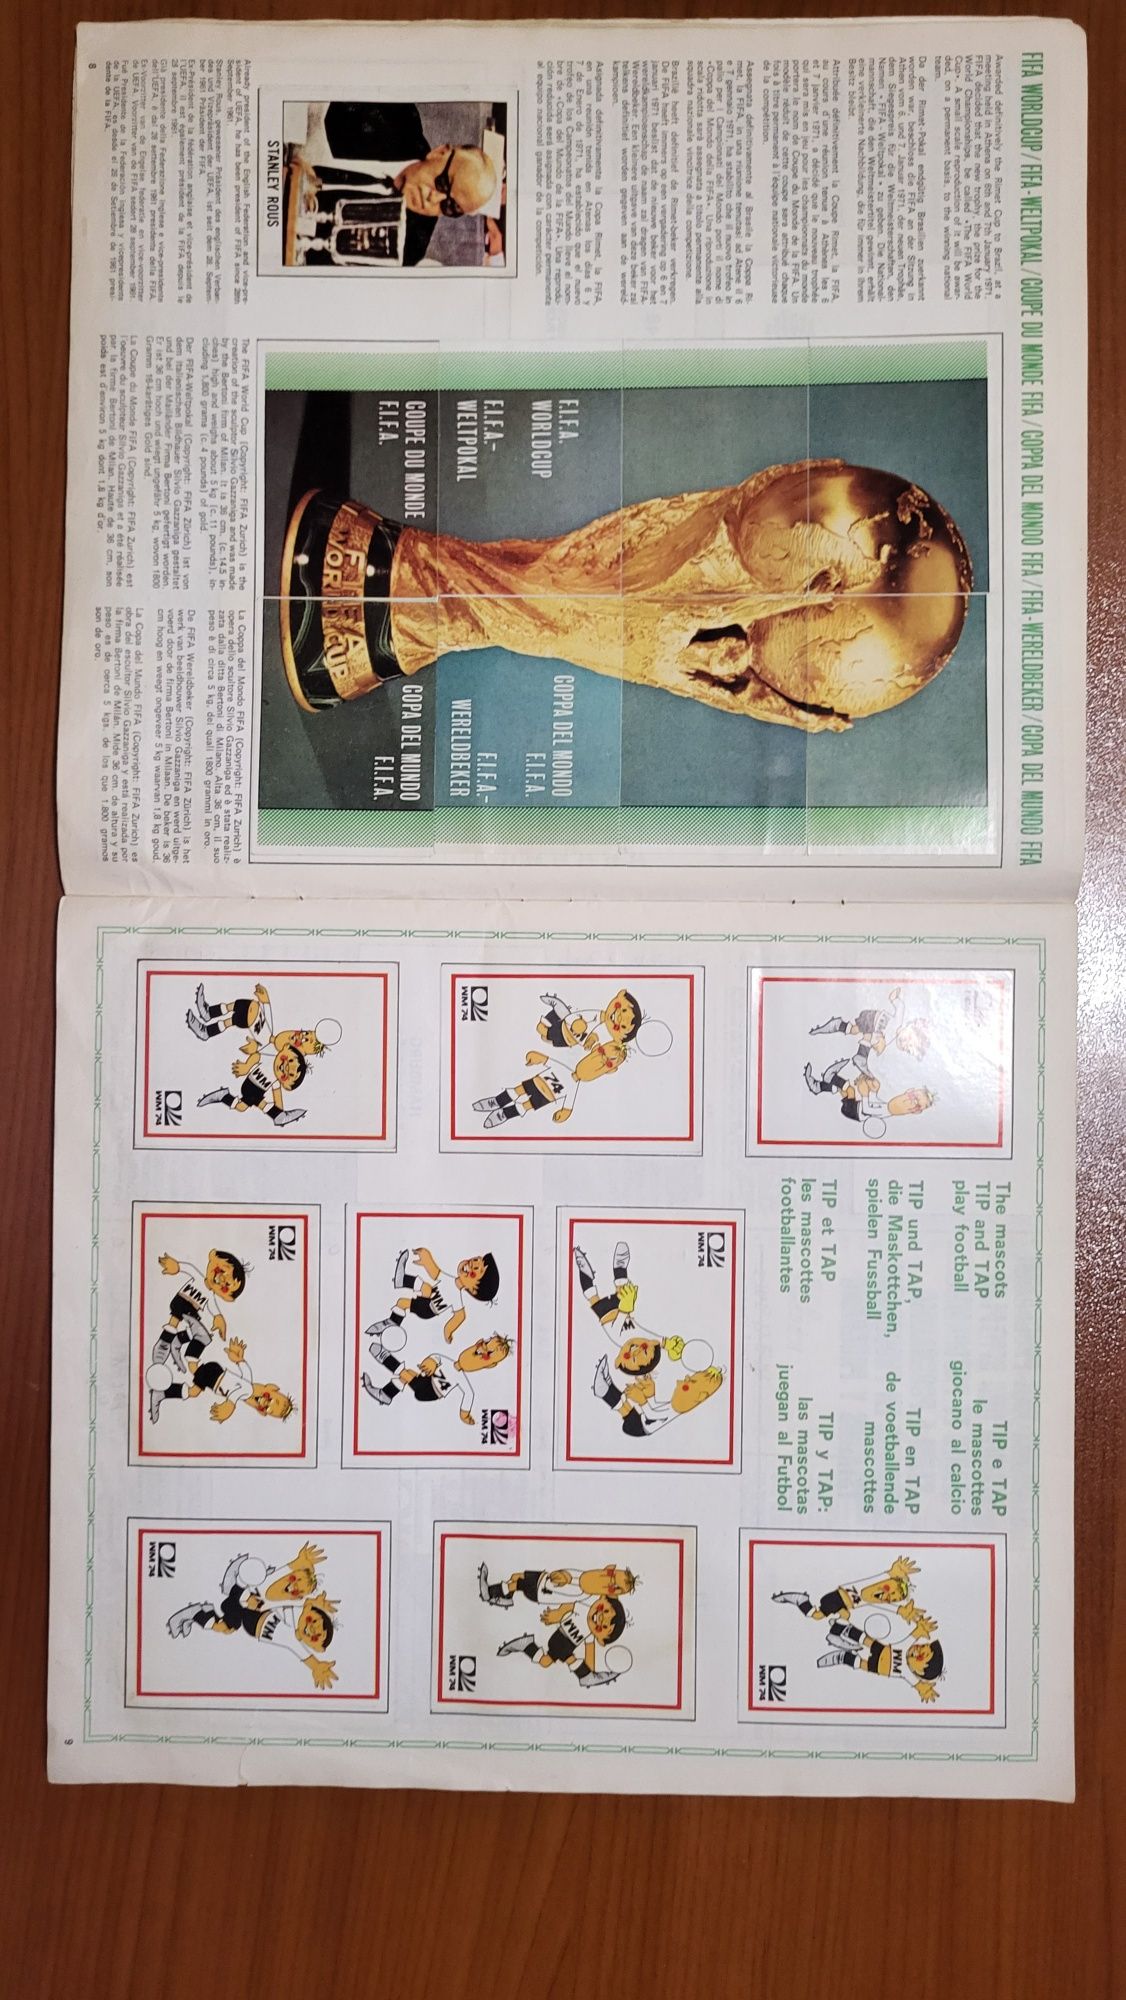 Munchen 74 Panini complet